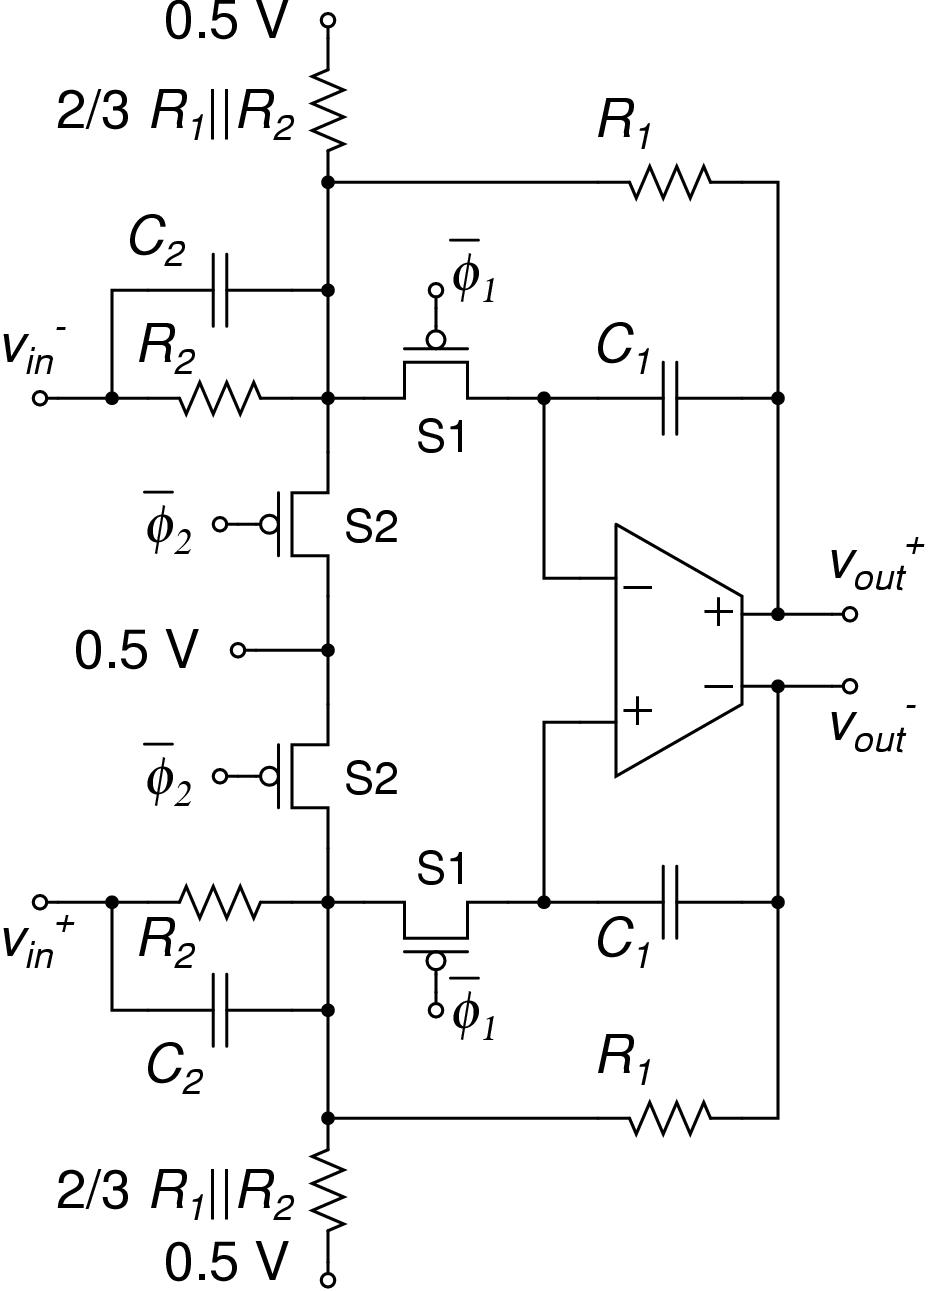 Track-and-hold circuit